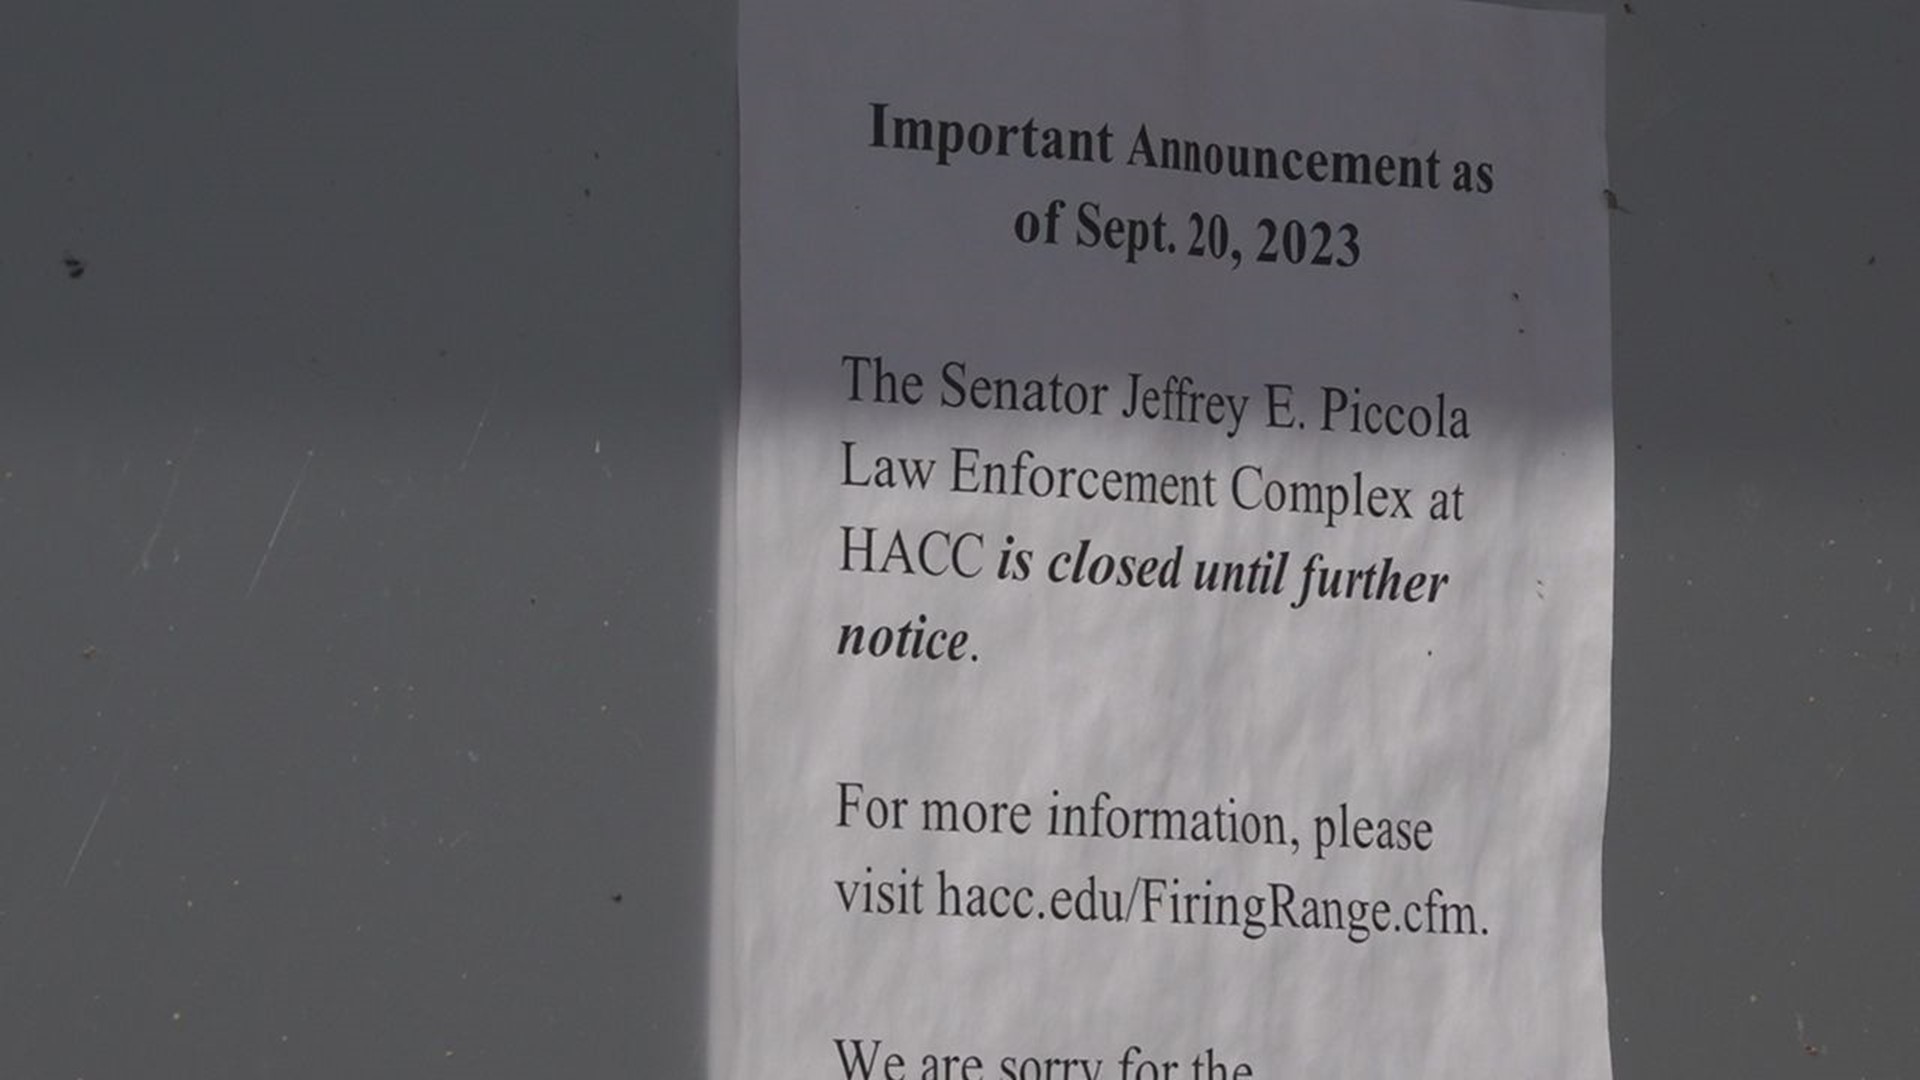 The building on the Harrisburg campus has been closed since September 20, with no signs of reopening any time soon.